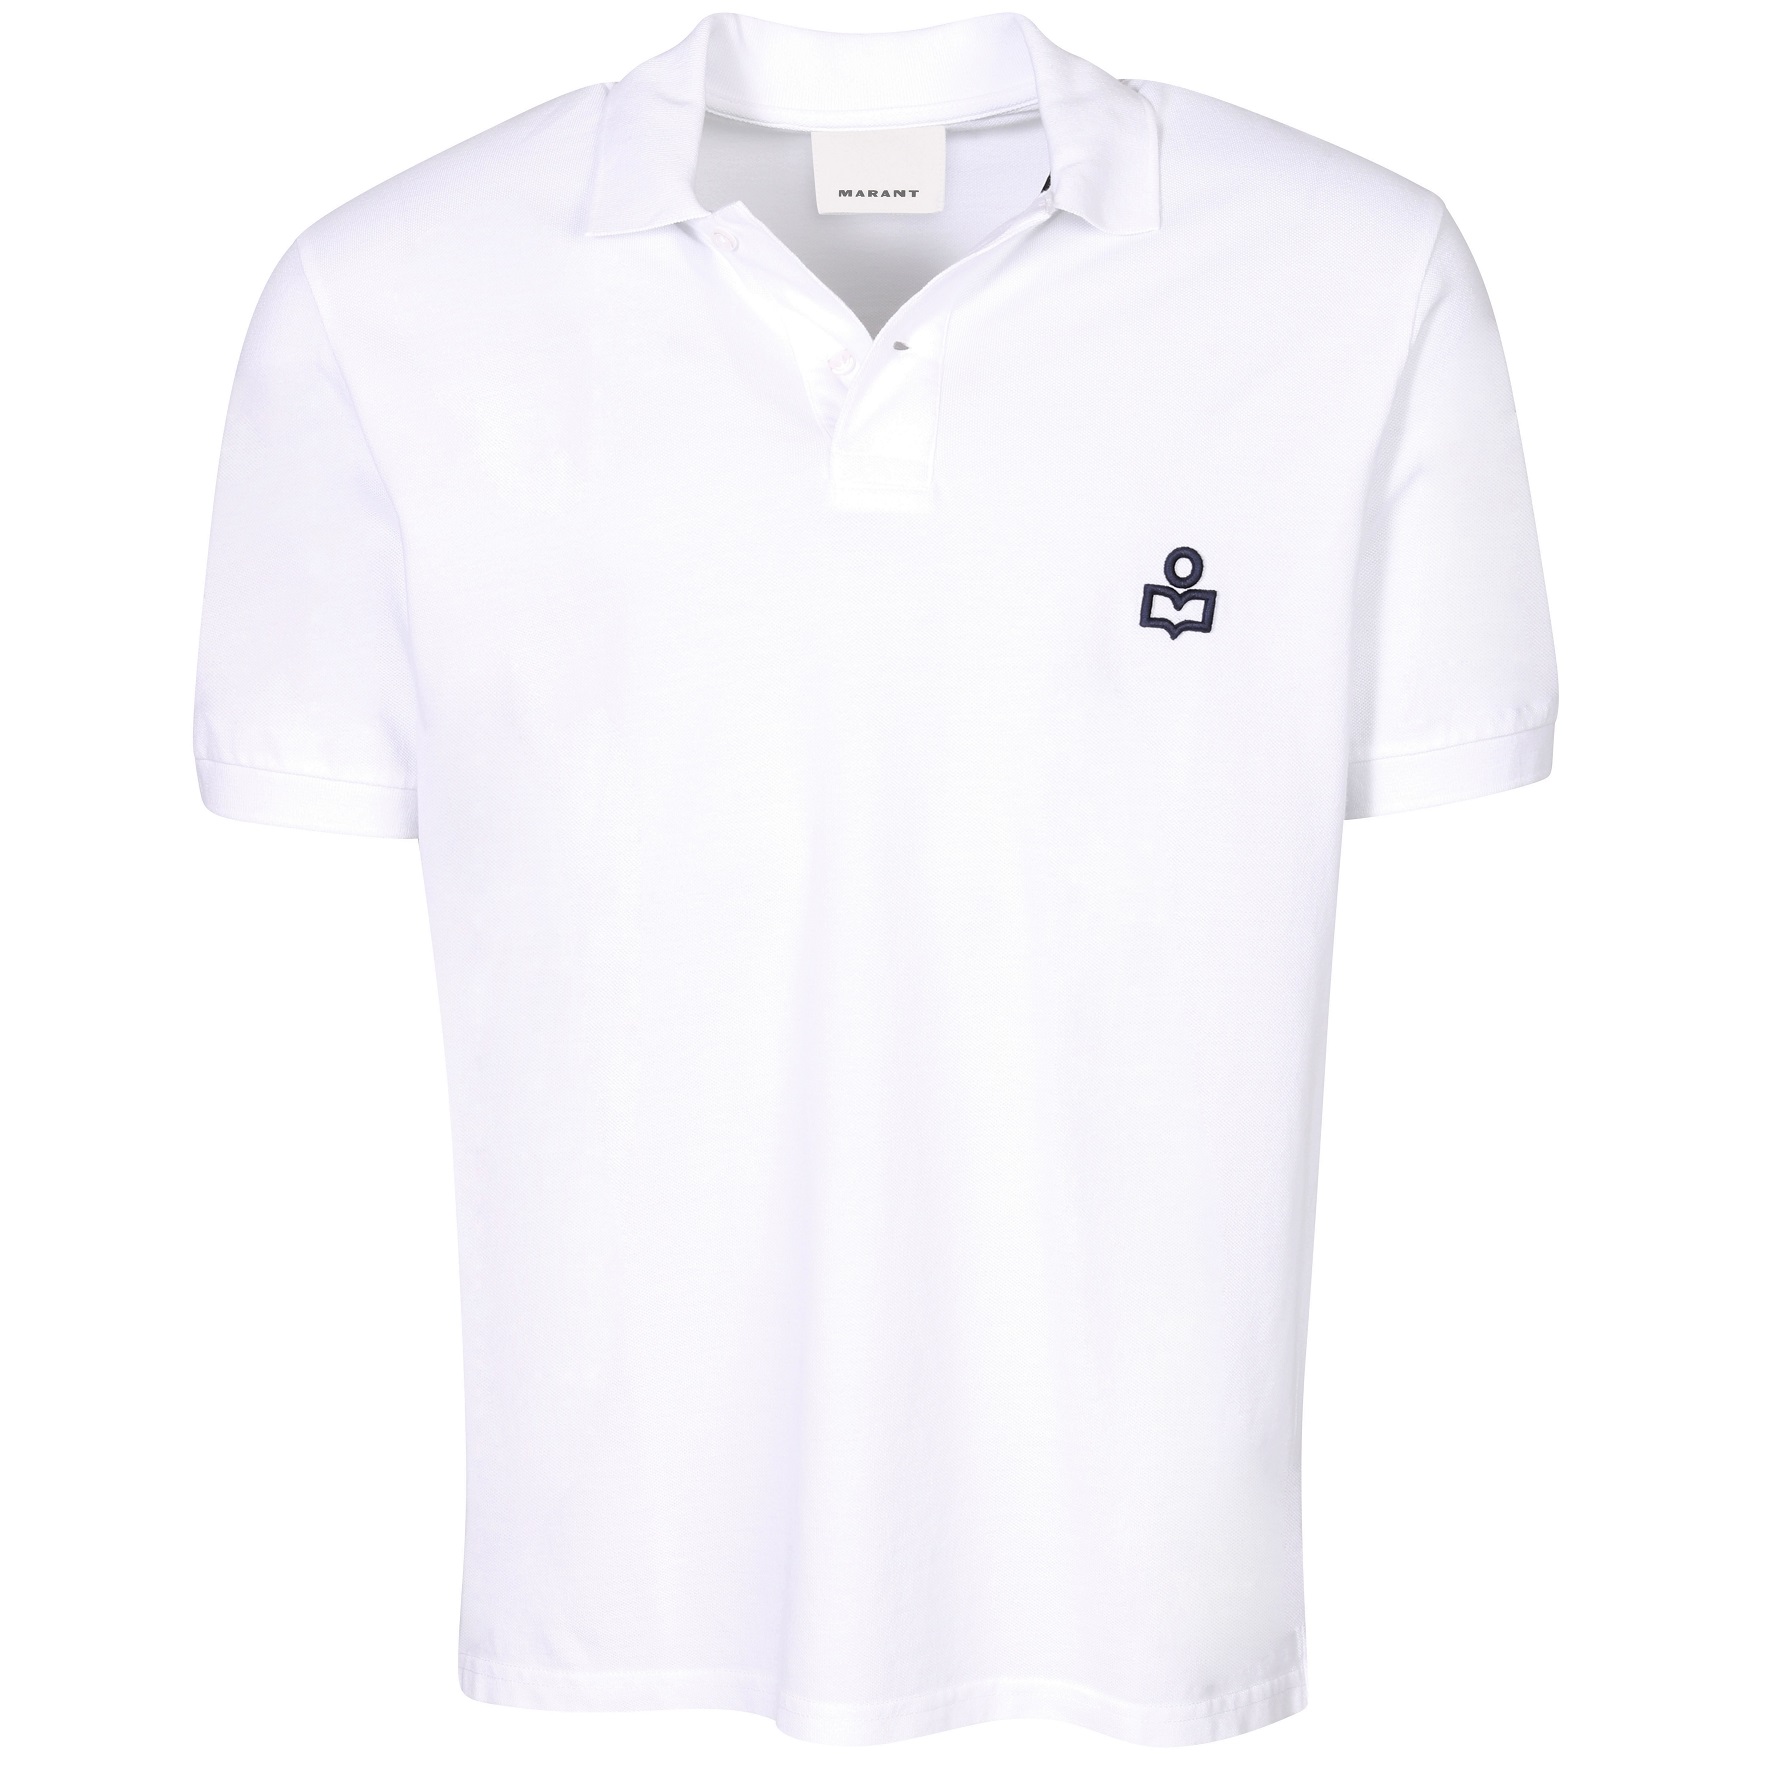 ISABEL MARANT Afko Polo Shirt in White/Navy M